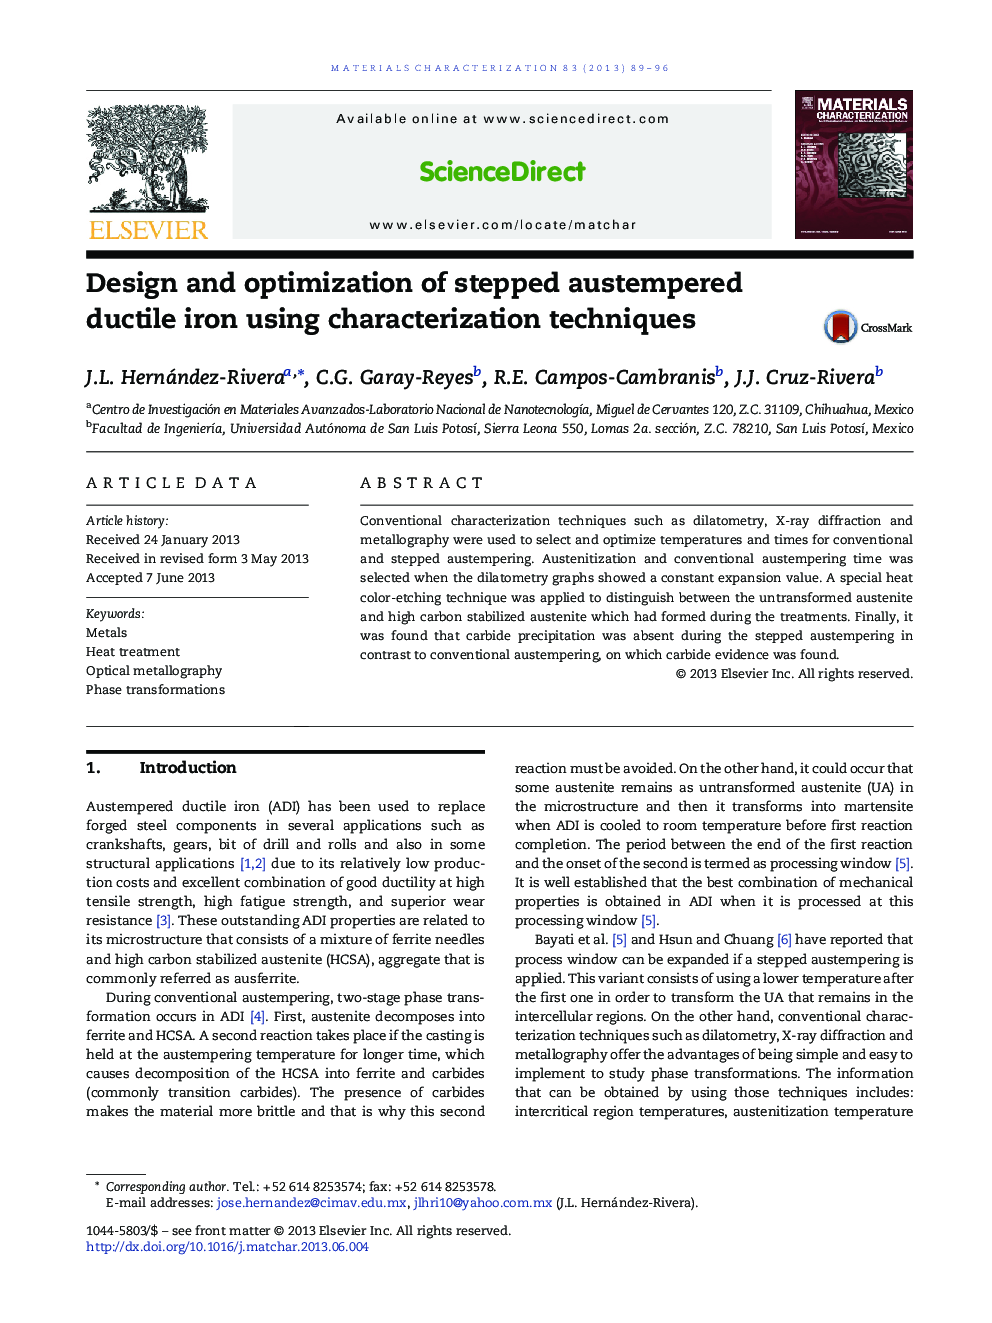 Design and optimization of stepped austempered ductile iron using characterization techniques